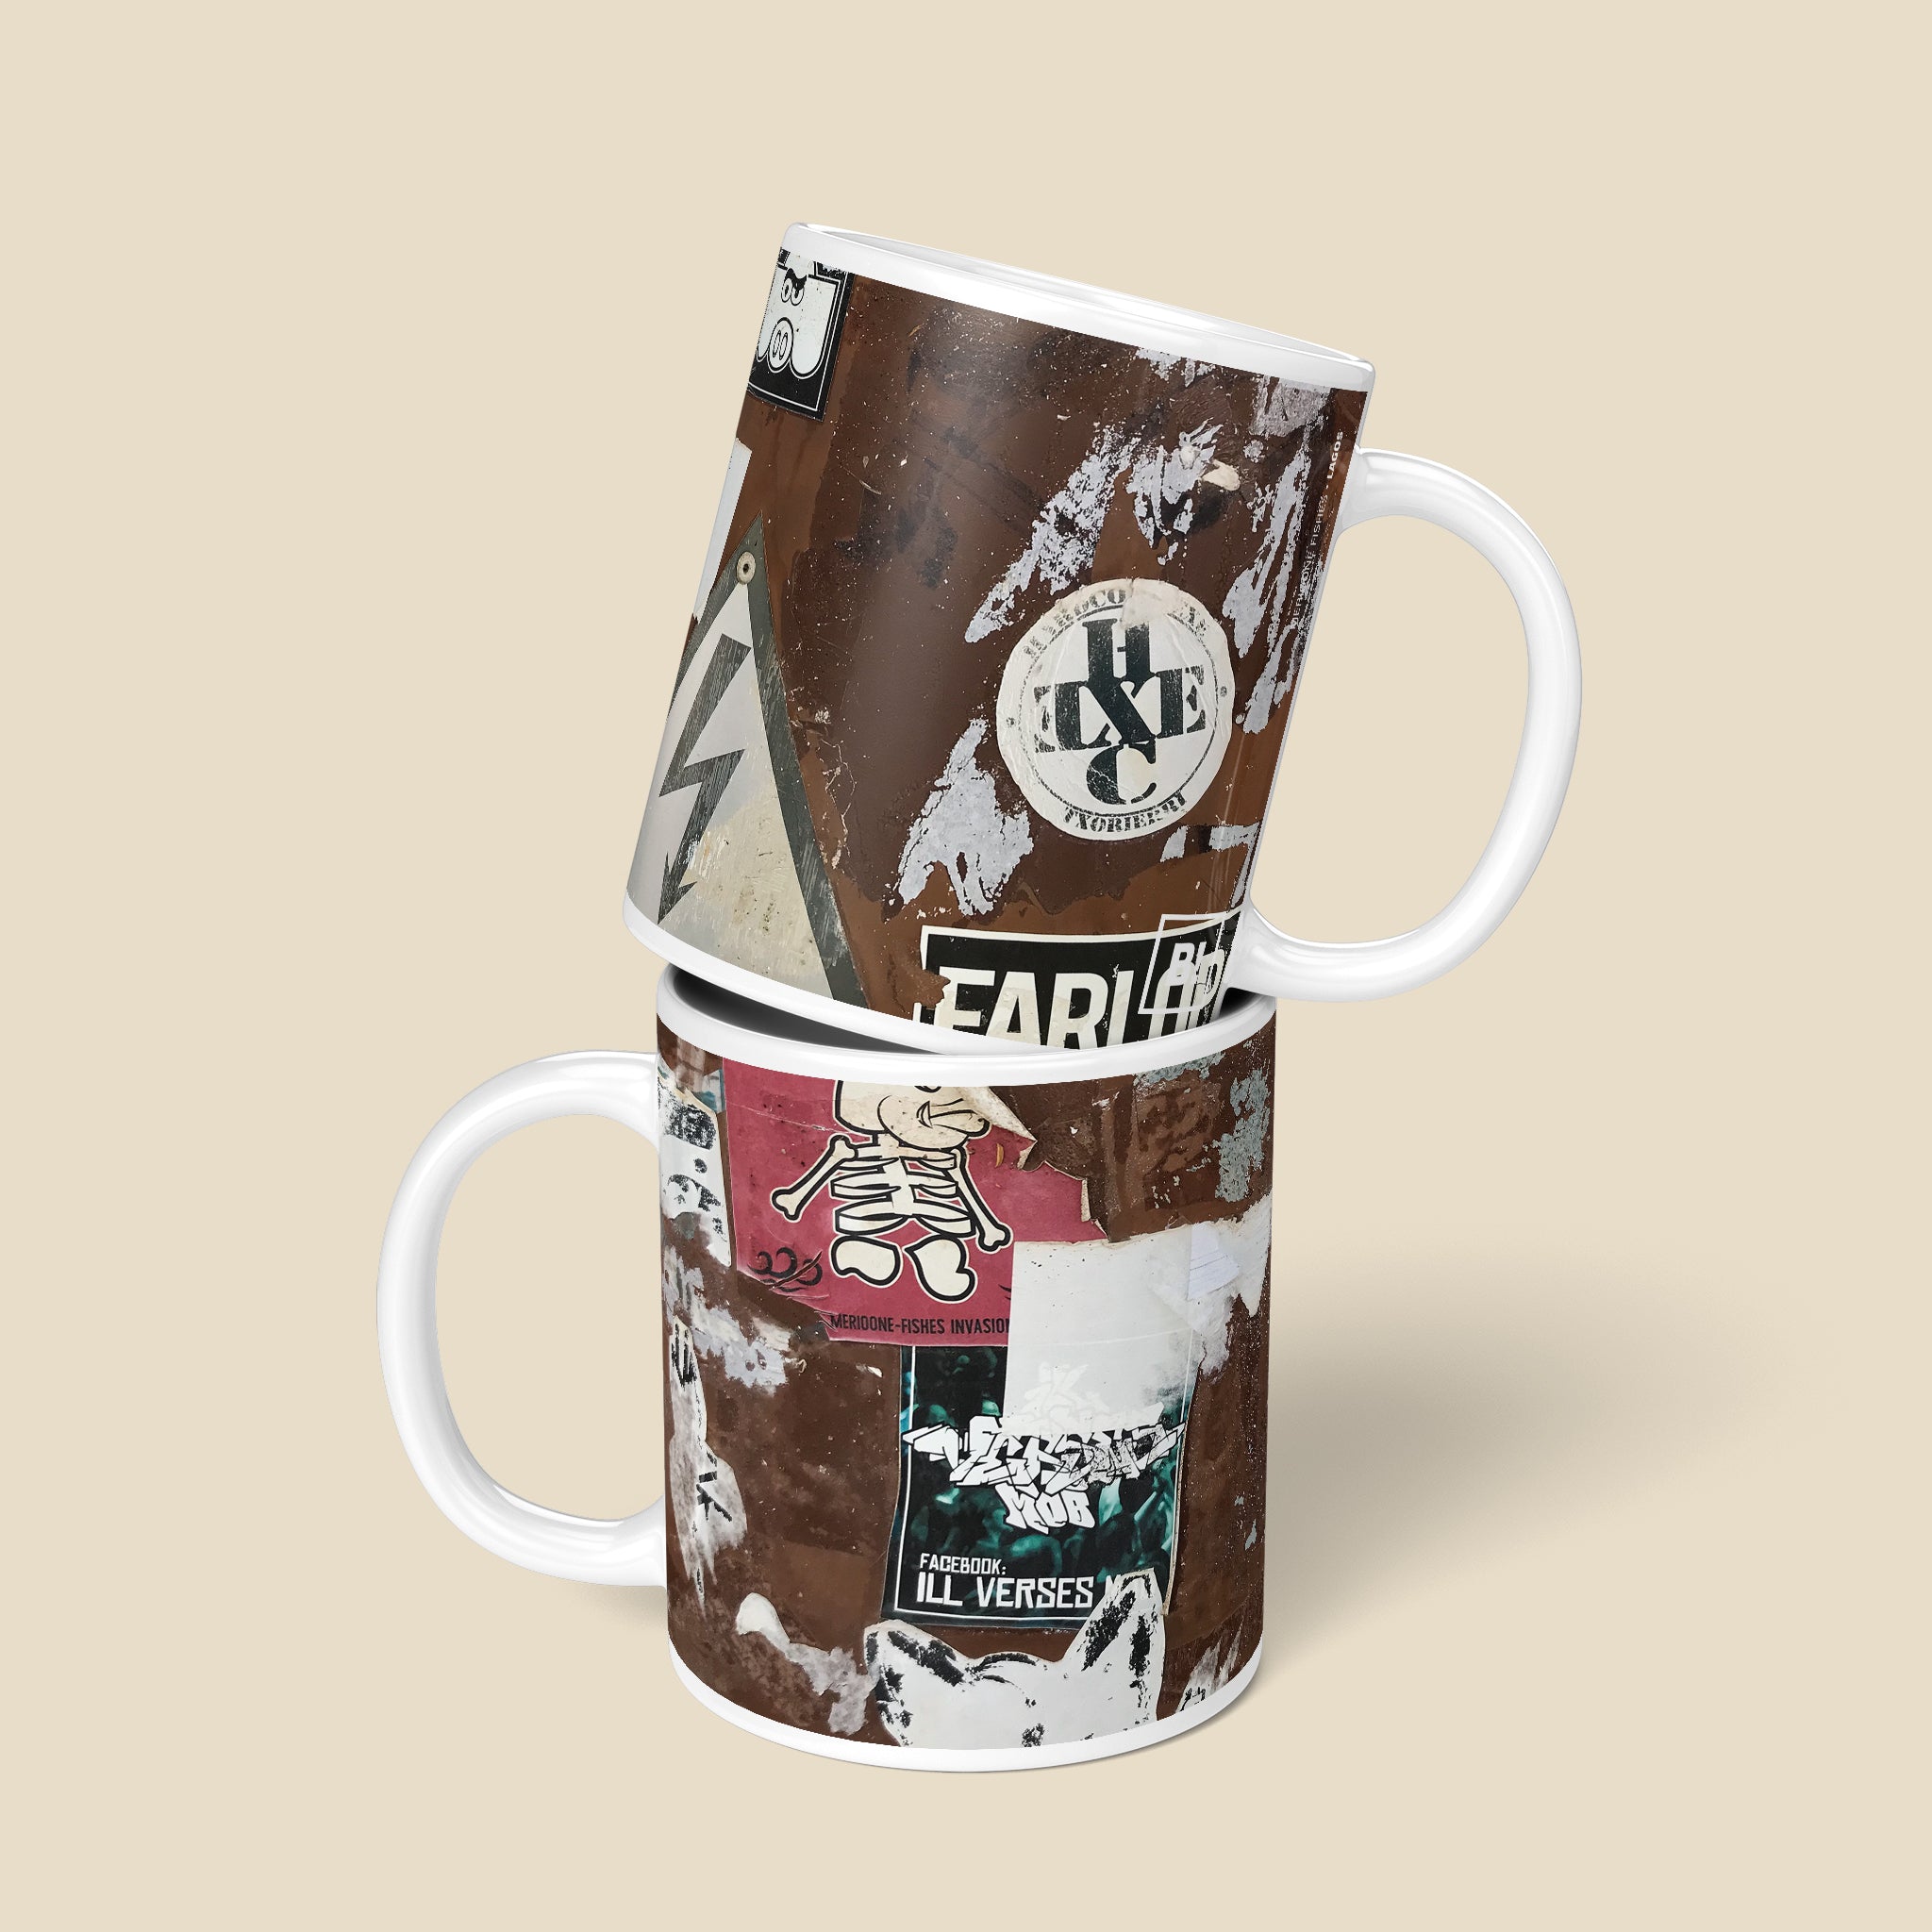 Be inspired by our Urban Art Coffee Mug – Merioone Fishes from Lagos. Featuring a front and back view of the 11oz mug. The design of the mug captures the essence of the street and gives the mug an authentic urban feel, making it resemble a piece of street art itself.